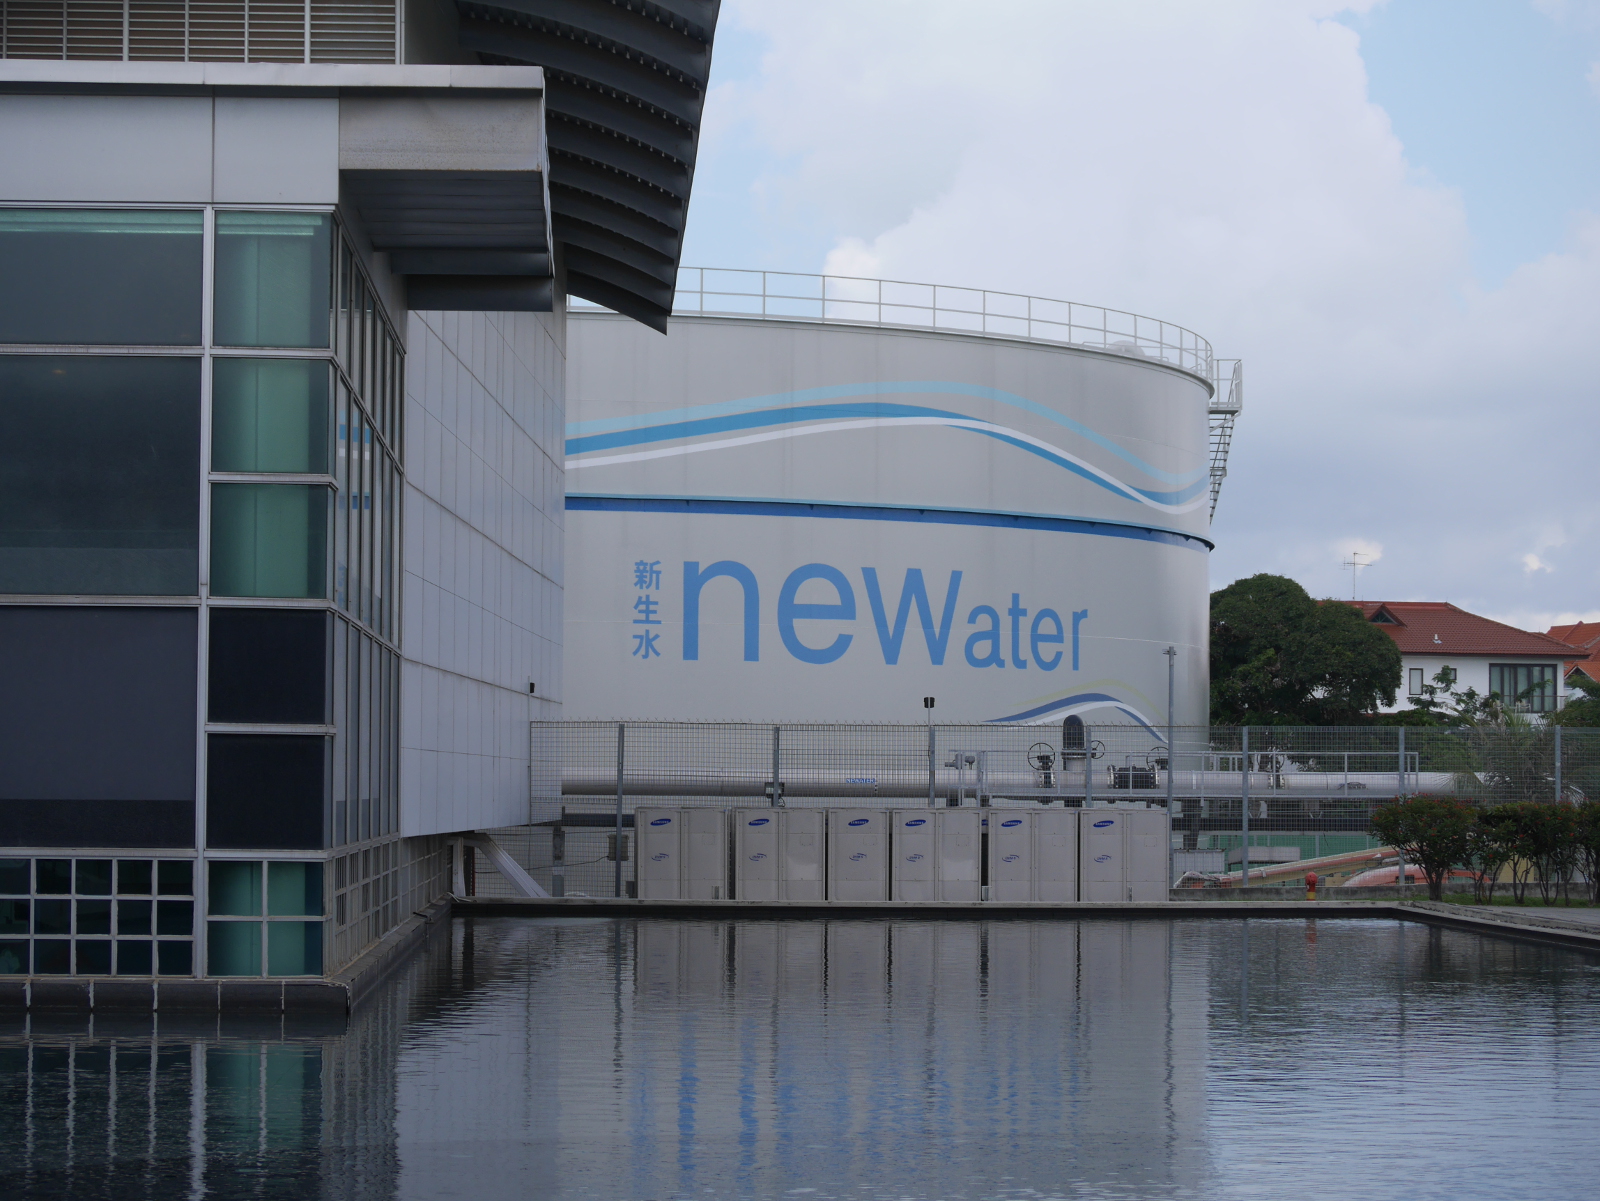 Tank at the Newater treatment plant with an integrated visitor center.